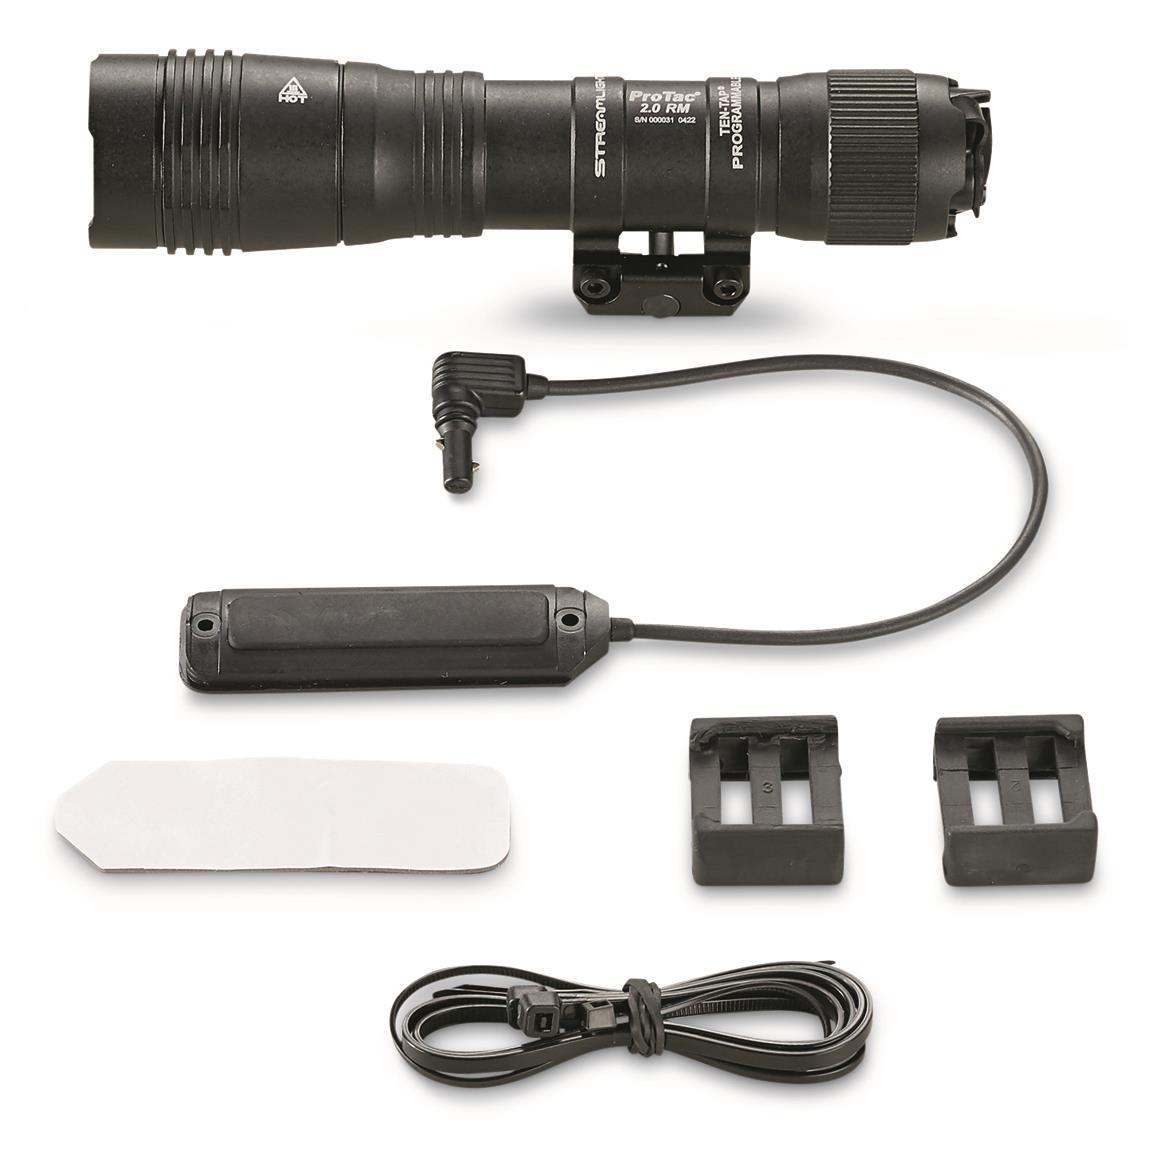 Streamlight ProTac 2.0 Rechargeable Rail-Mount Weapon Light with Remote Pressure Switch